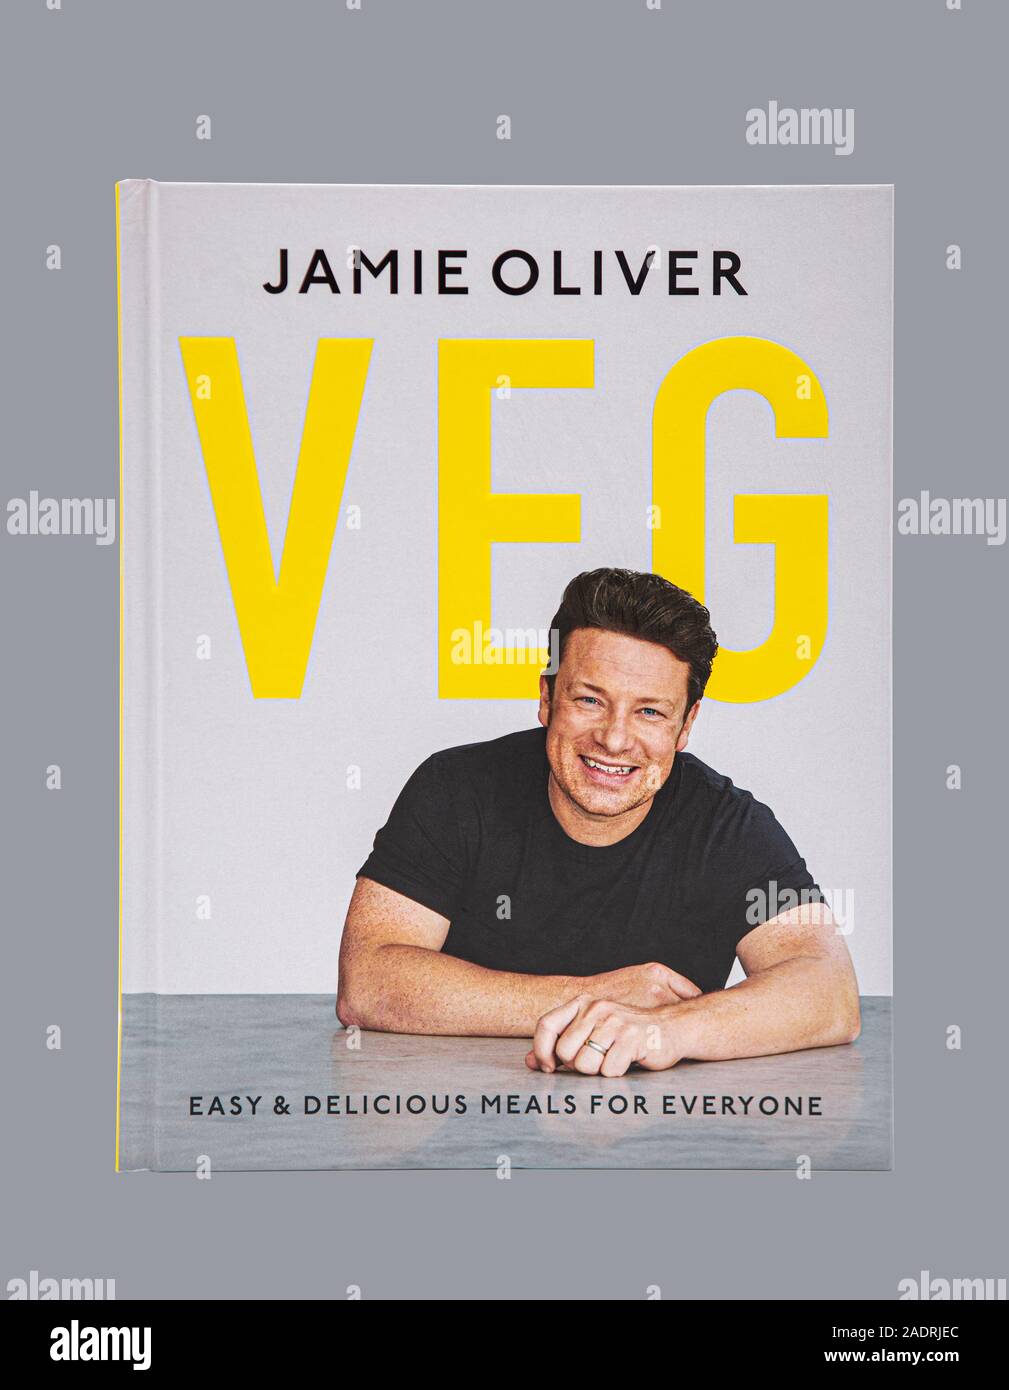 SWINDON, UK - NOVEMBER 25, 2019: Jamie Oliver Veg Cook Book, Easy and Delicious Meals for everyone on a gray background. Stock Photo